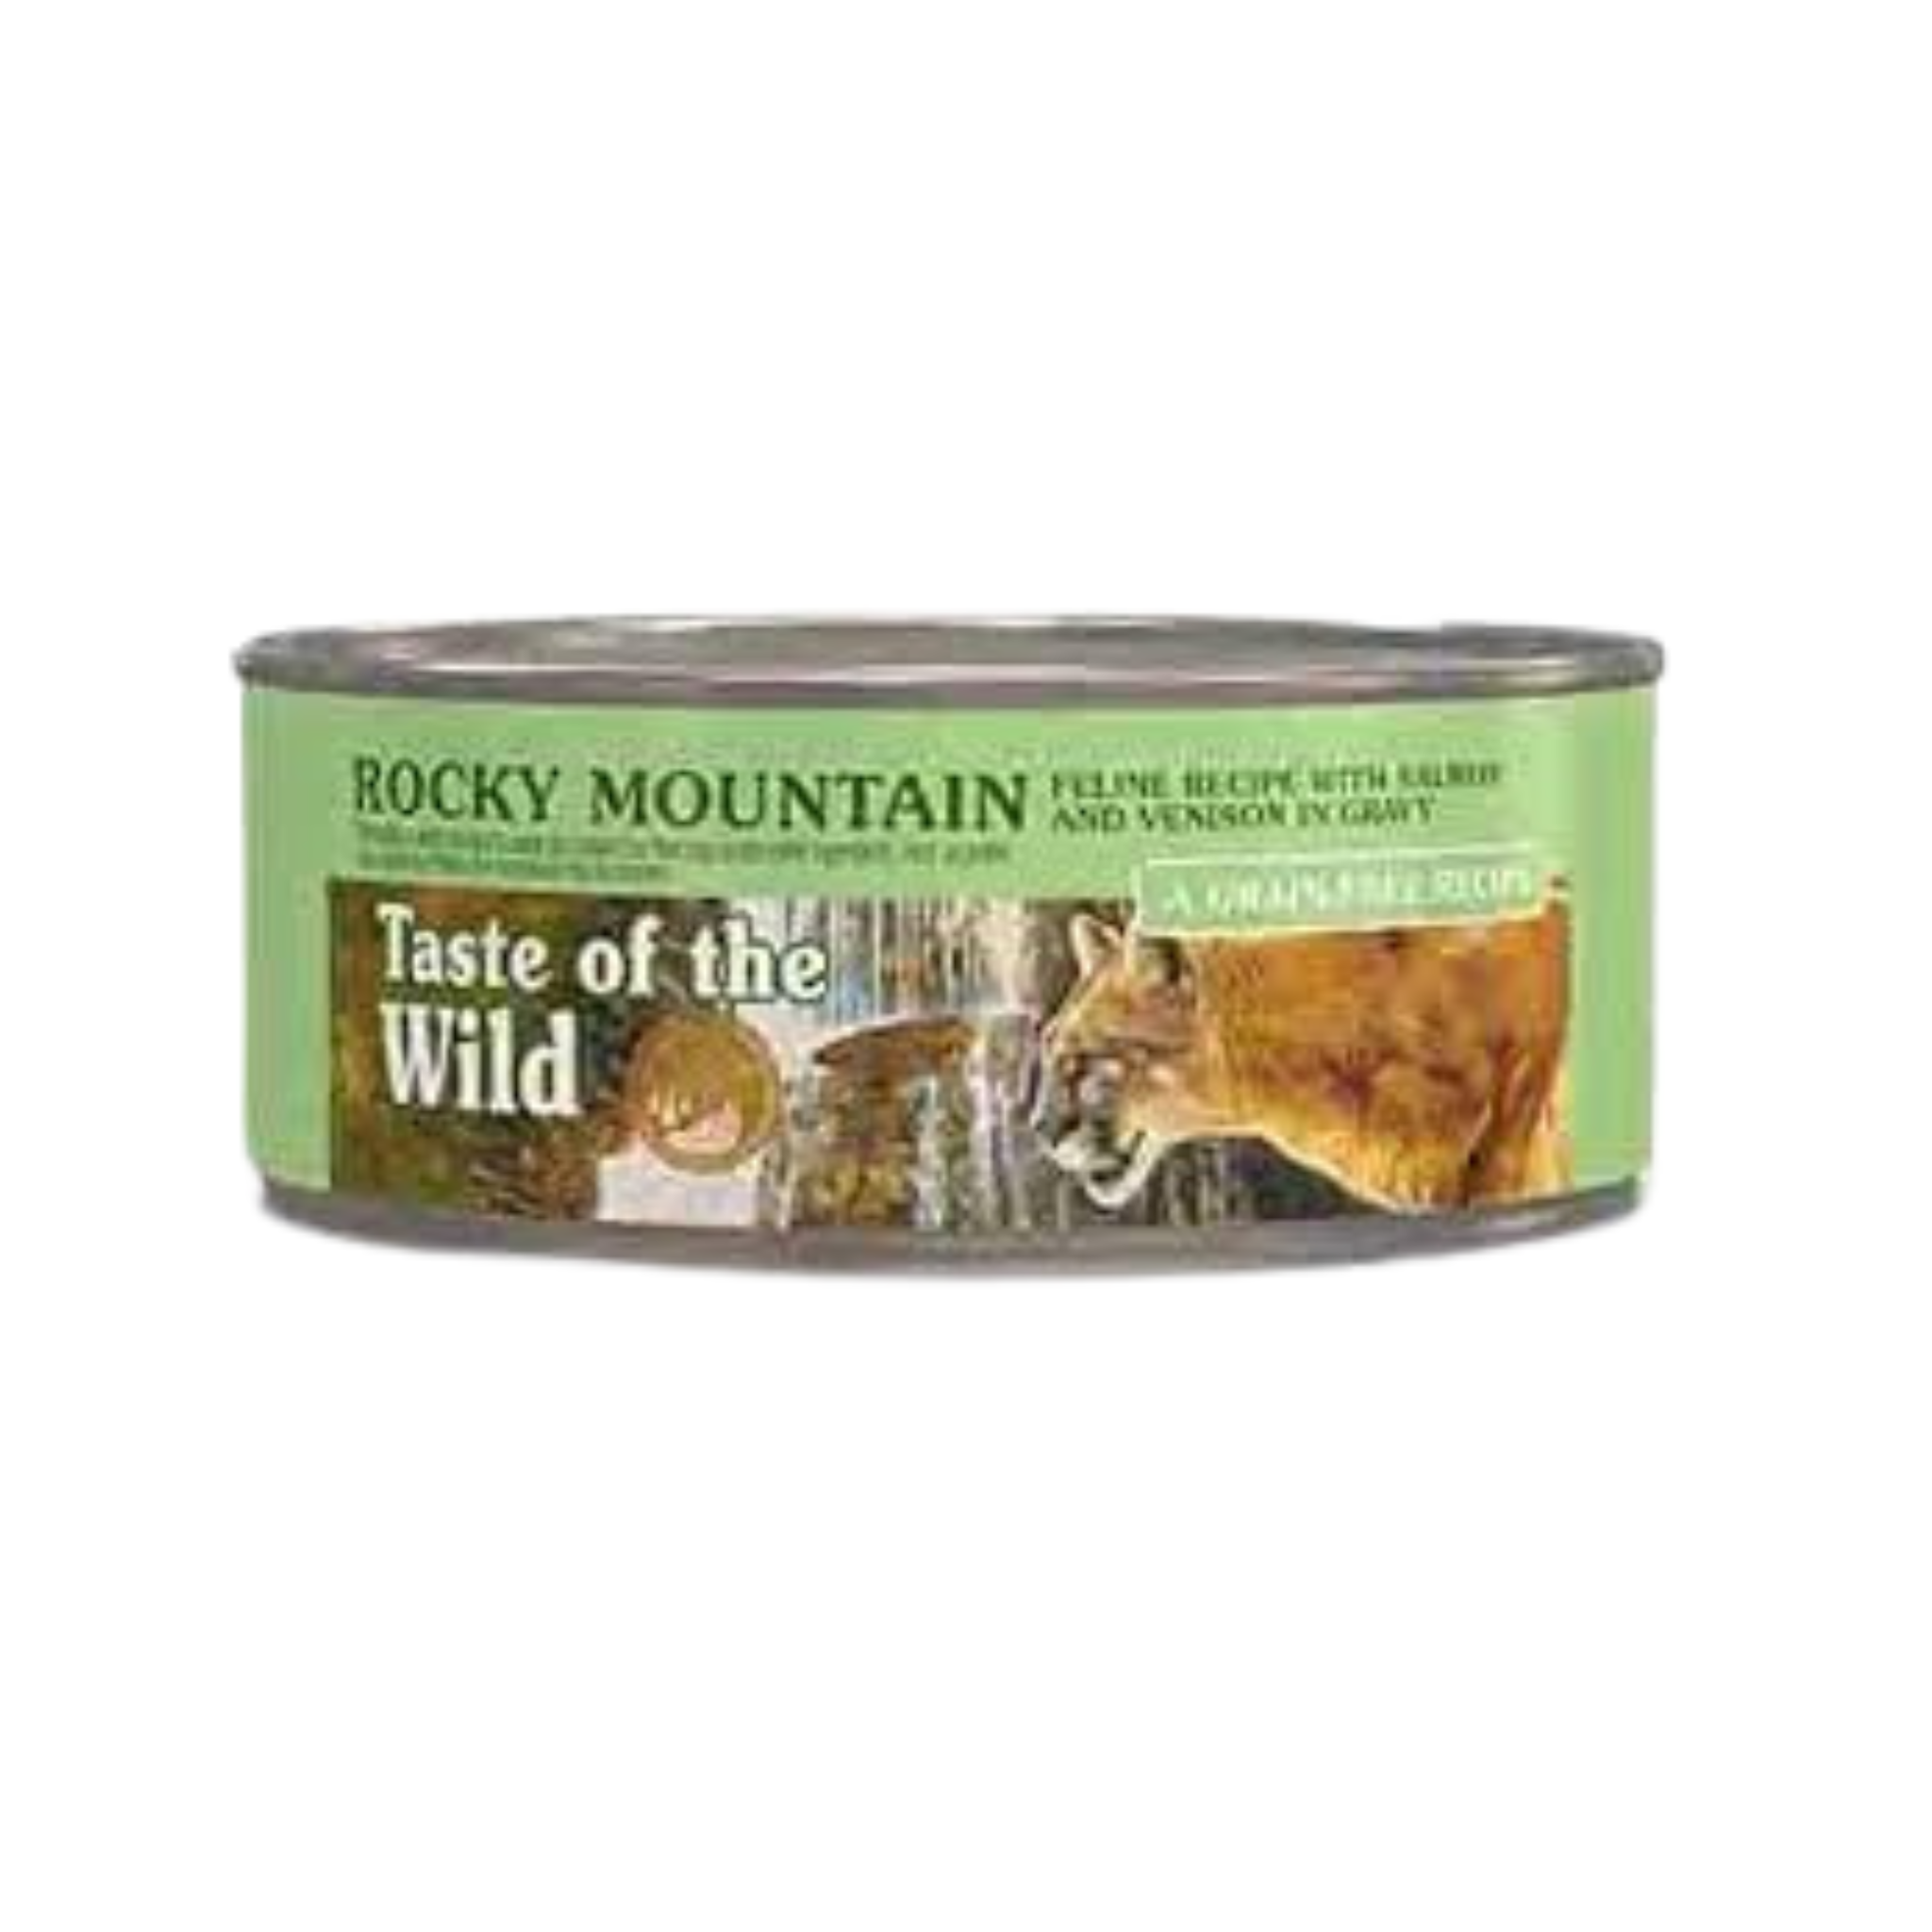 Taste of the Wild Rocky Mountain Cat Canned